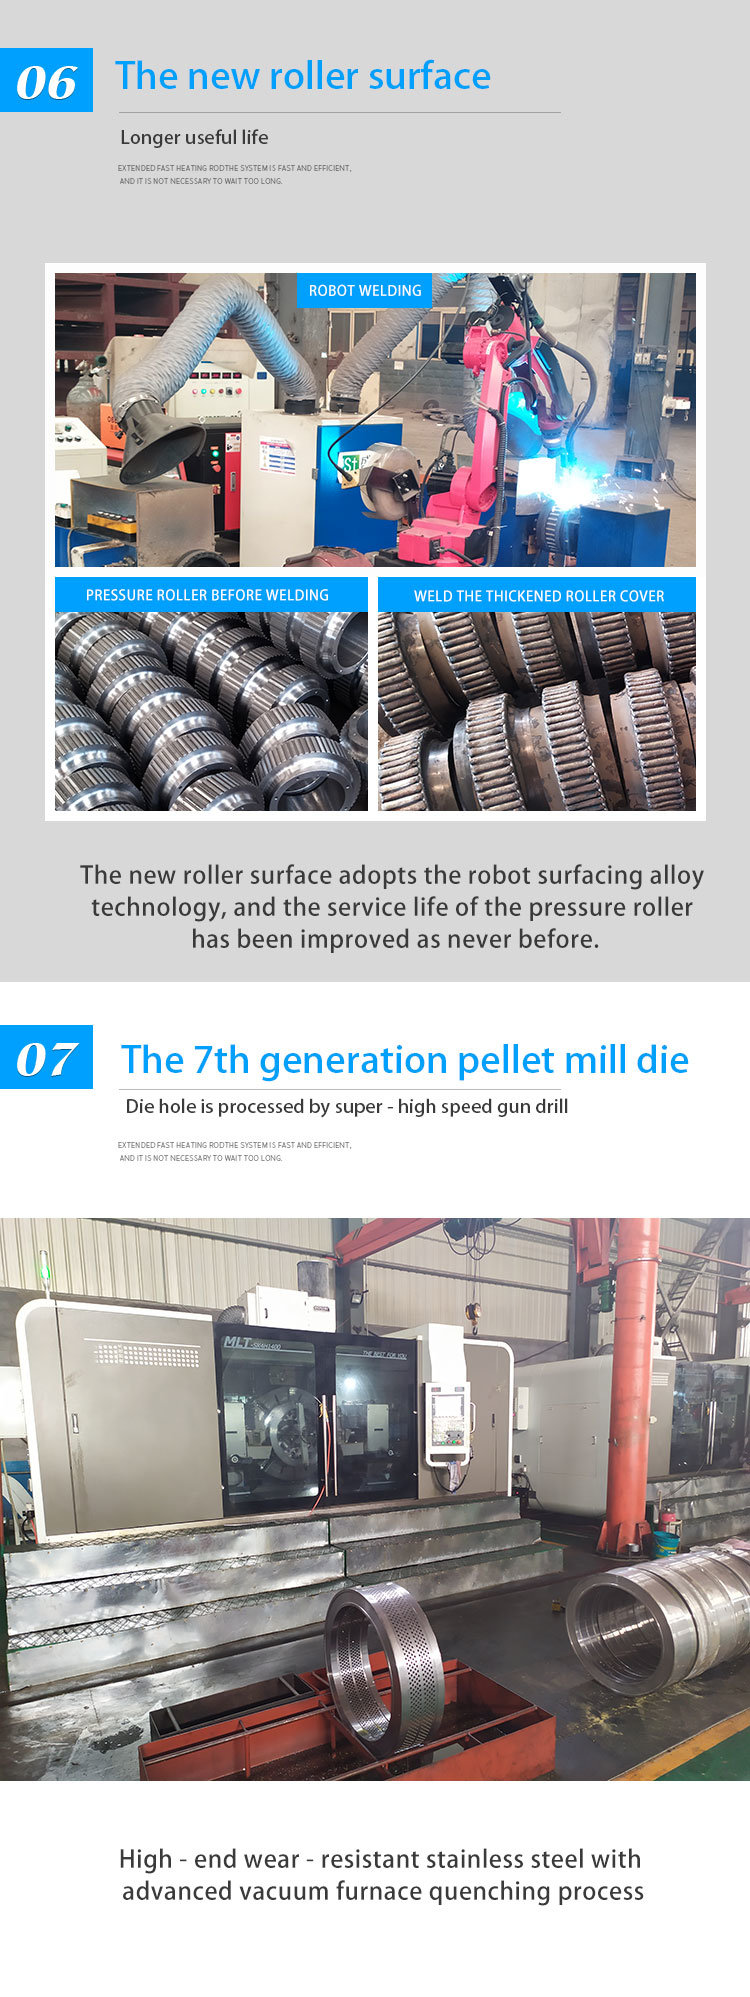 What Is a Pellet Mill Used for?